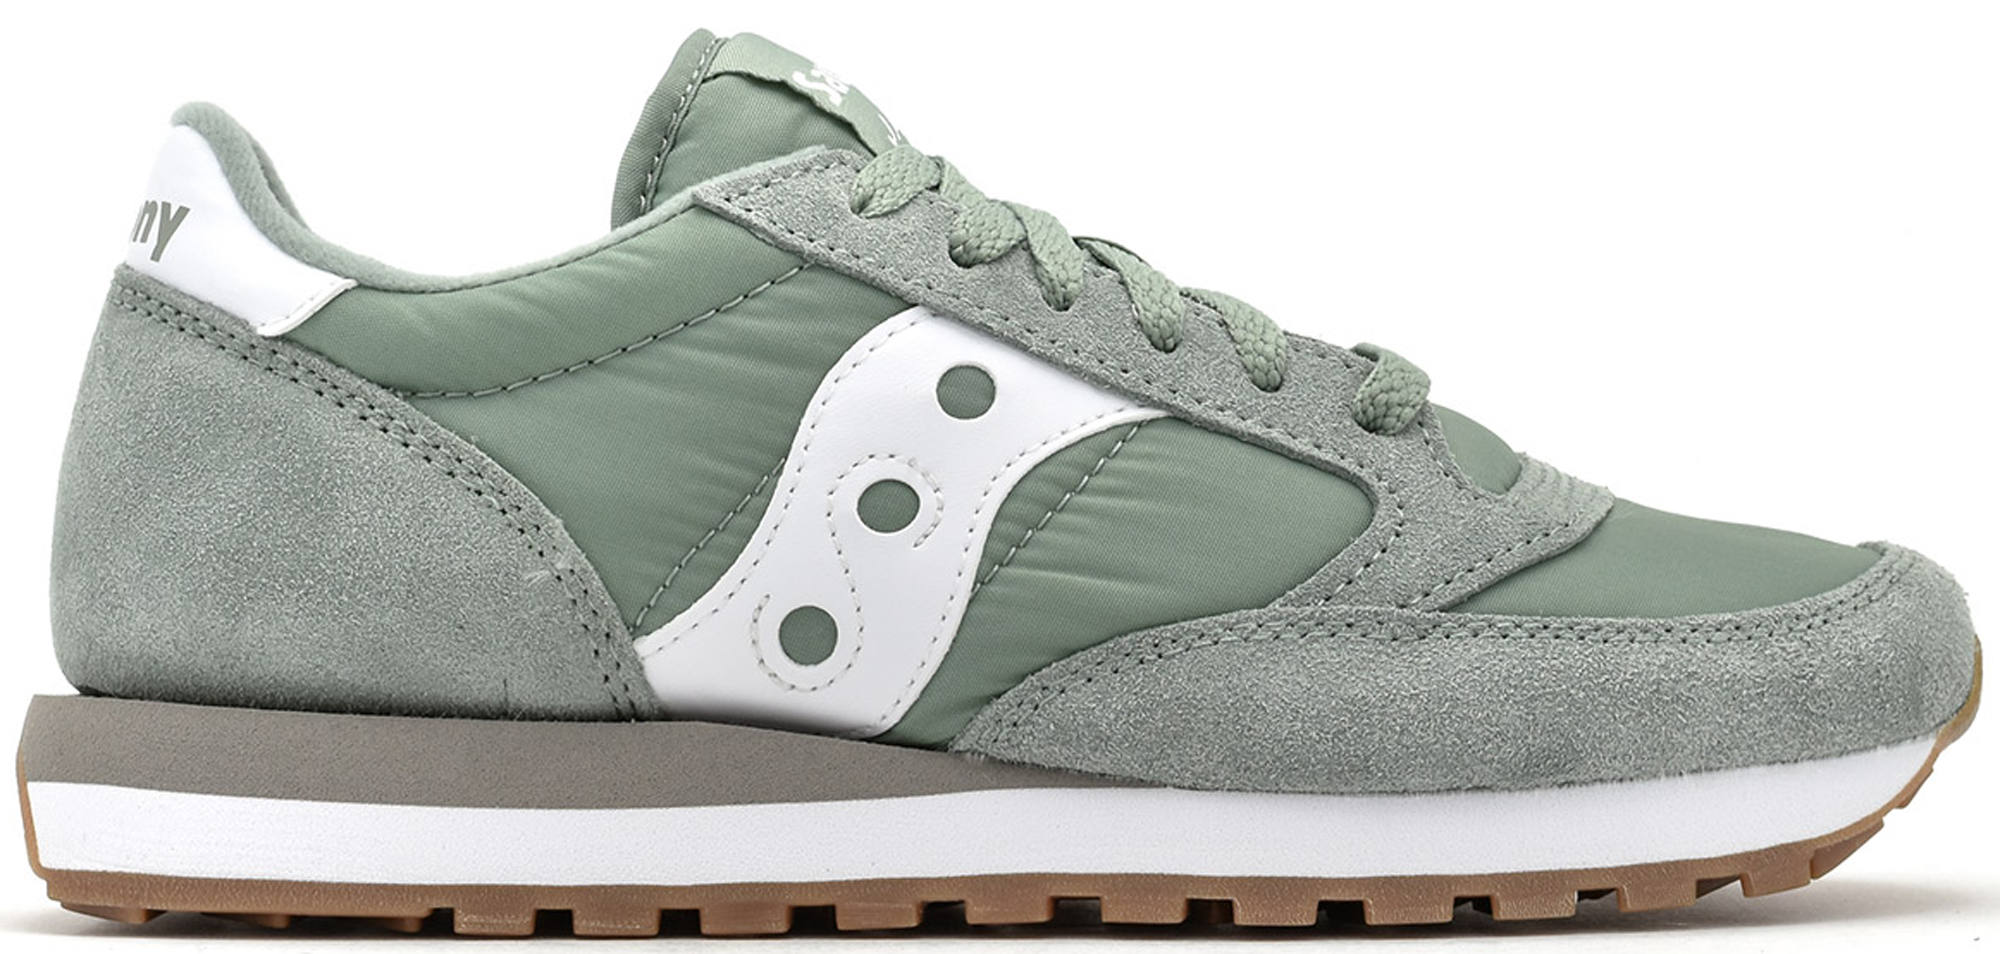 saucony shoes green